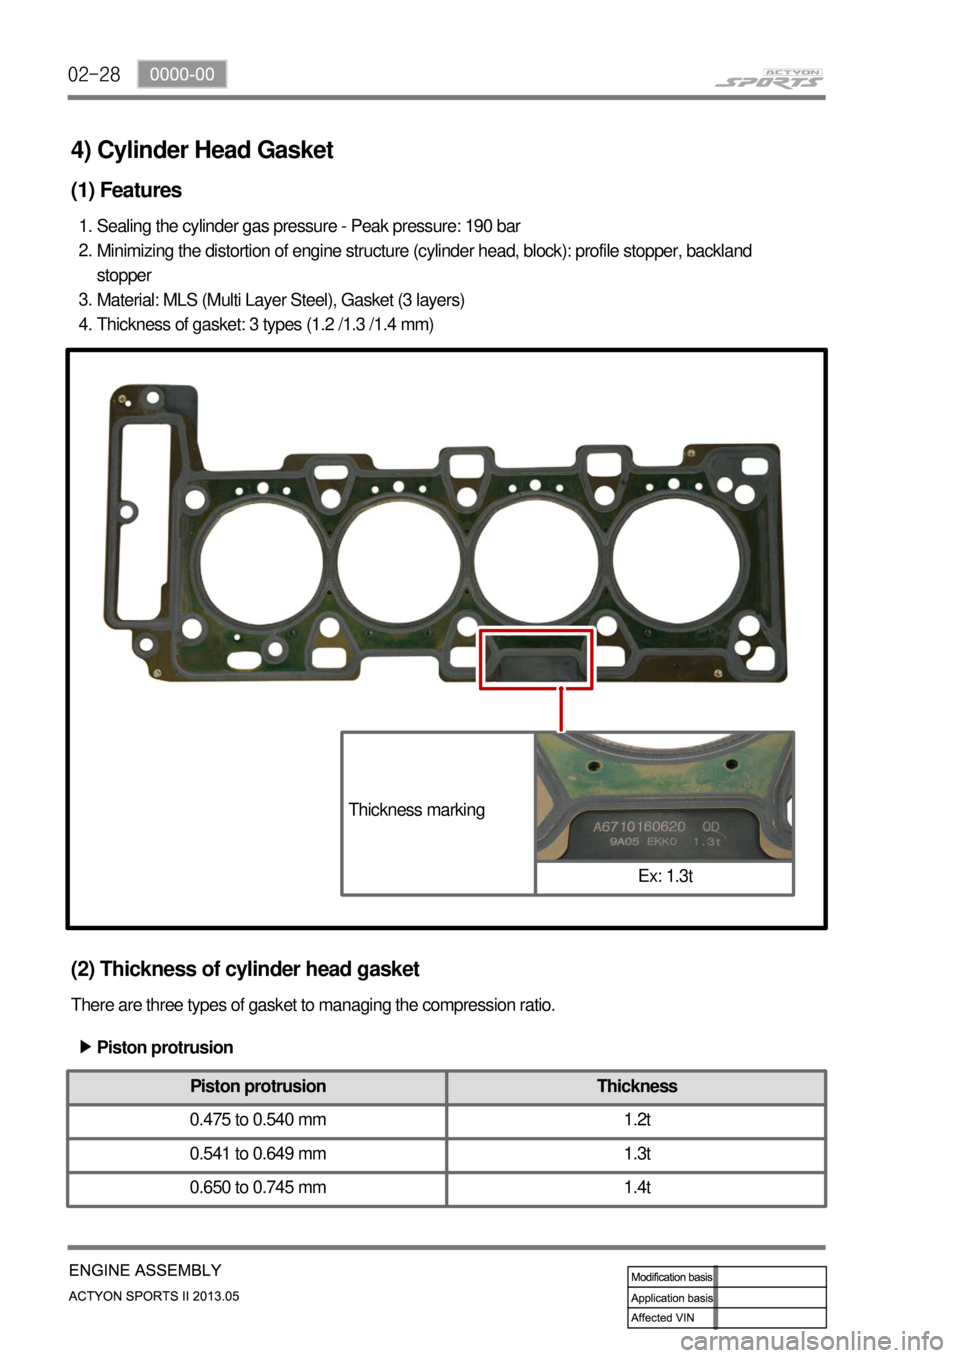 SSANGYONG NEW ACTYON SPORTS 2013  Service Manual 02-28
Thickness markingEx: 1.3t
4) Cylinder Head Gasket
(1) Features
Sealing the cylinder gas pressure - Peak pressure: 190 bar
Minimizing the distortion of engine structure (cylinder head, block): \
